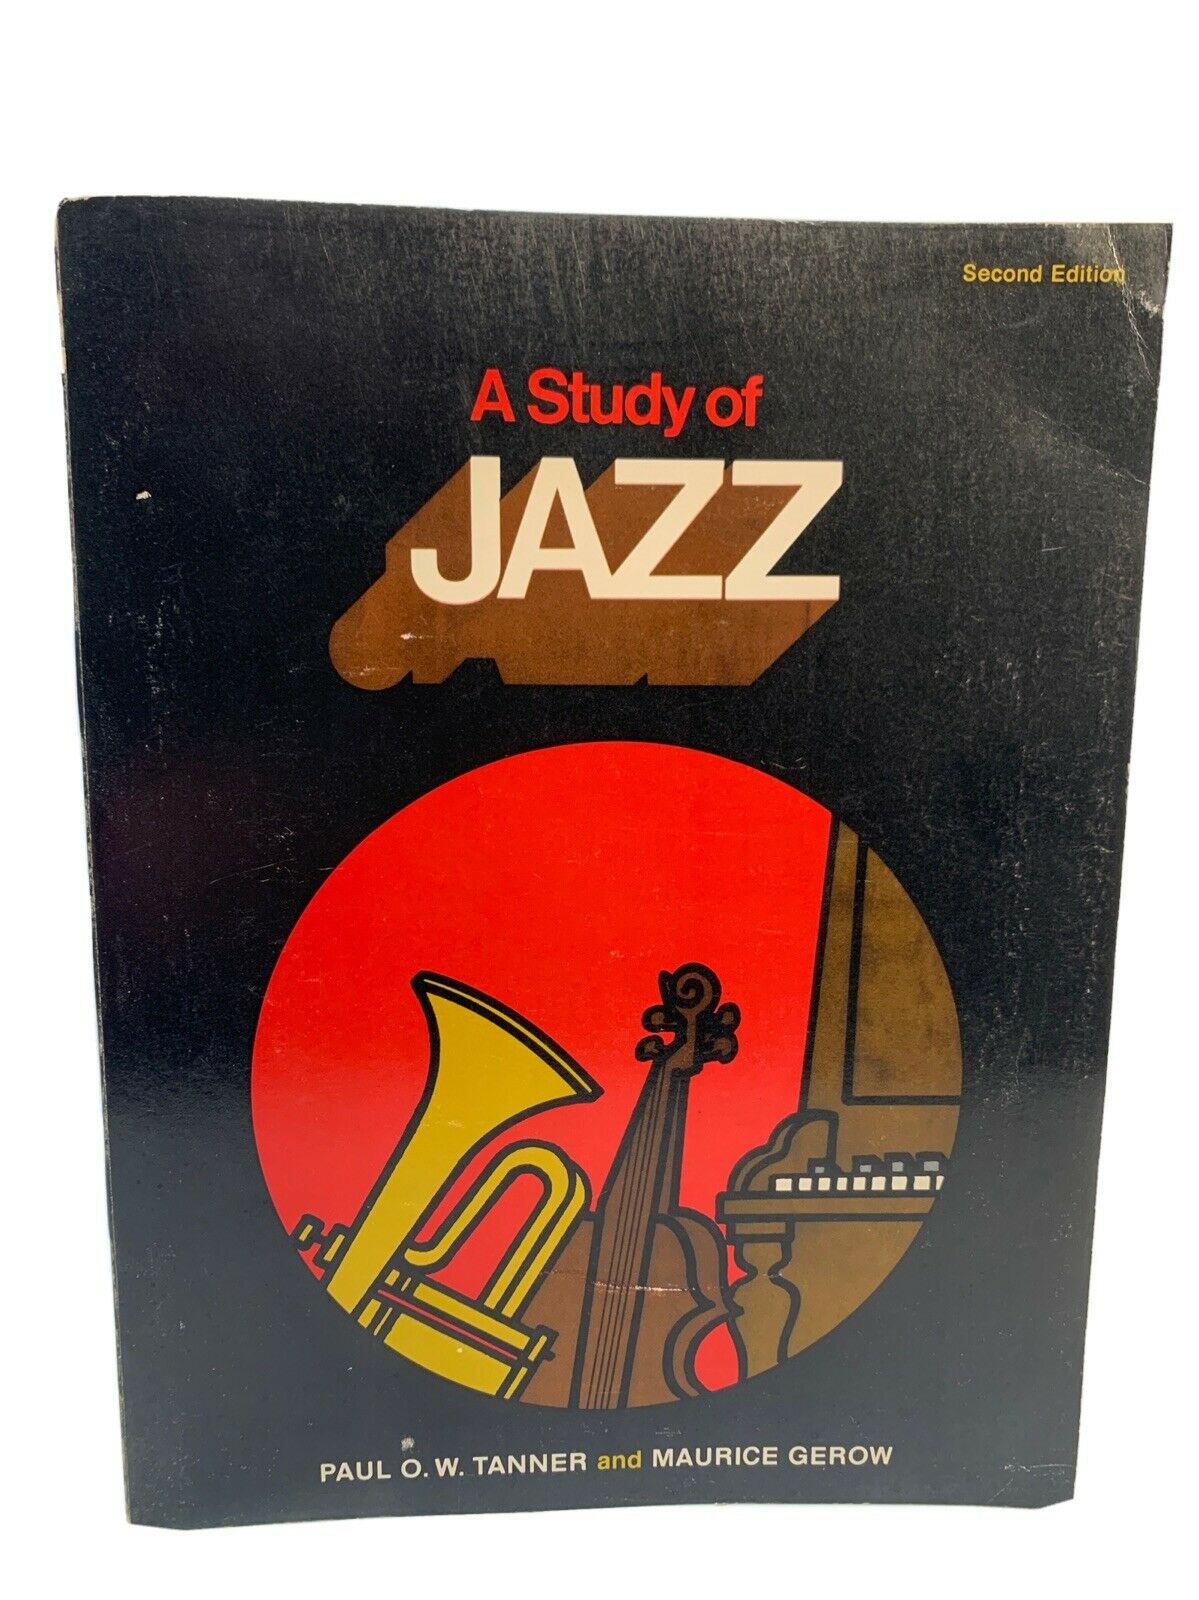 A Study of Jazz by Paul Tanner and Maurice Gerow 1973 Book & 7" Record